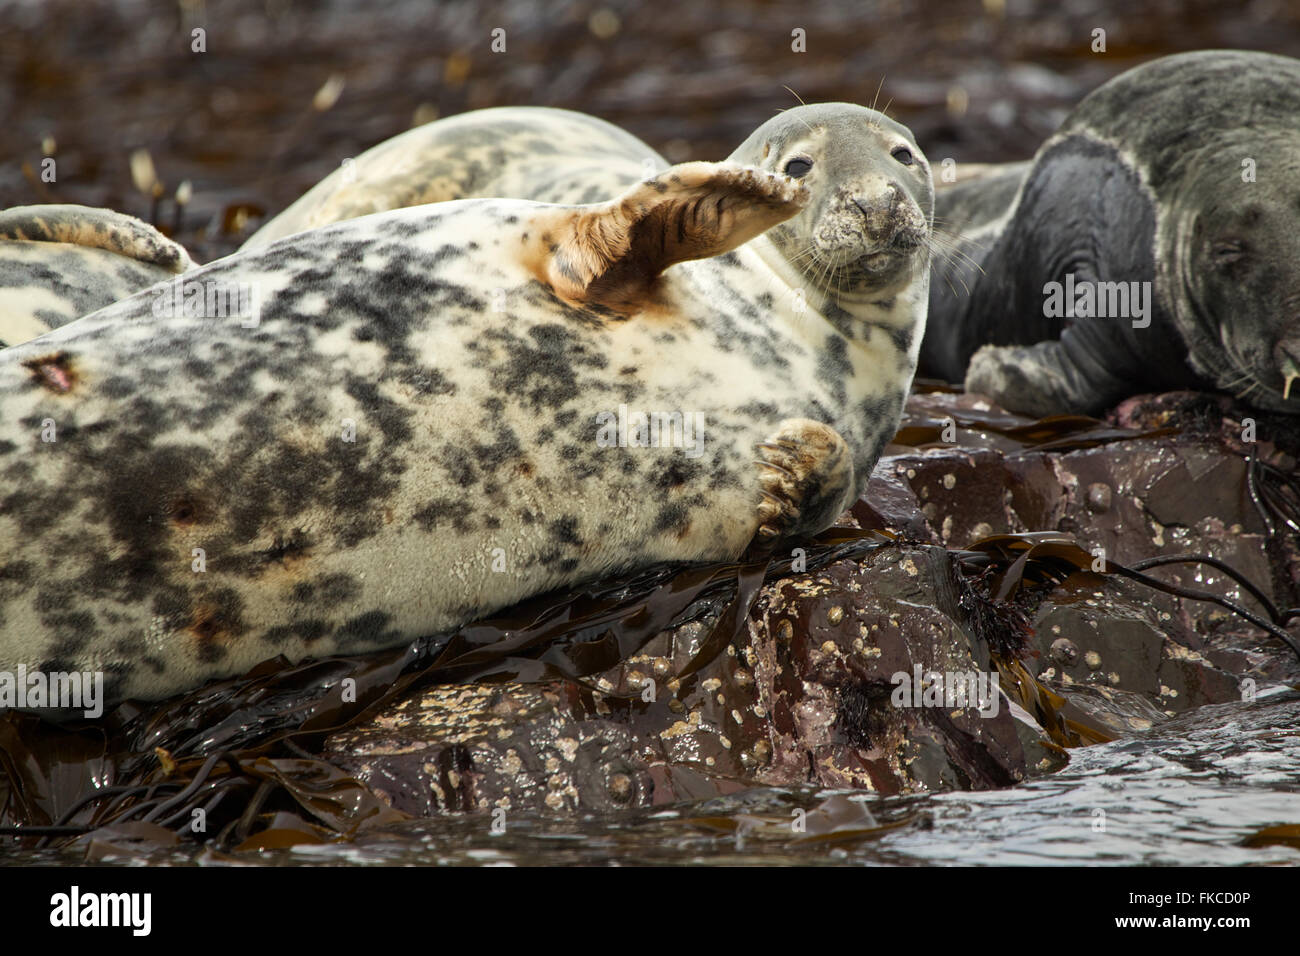 A grey seal laying on its side, Farne Islands Stock Photo